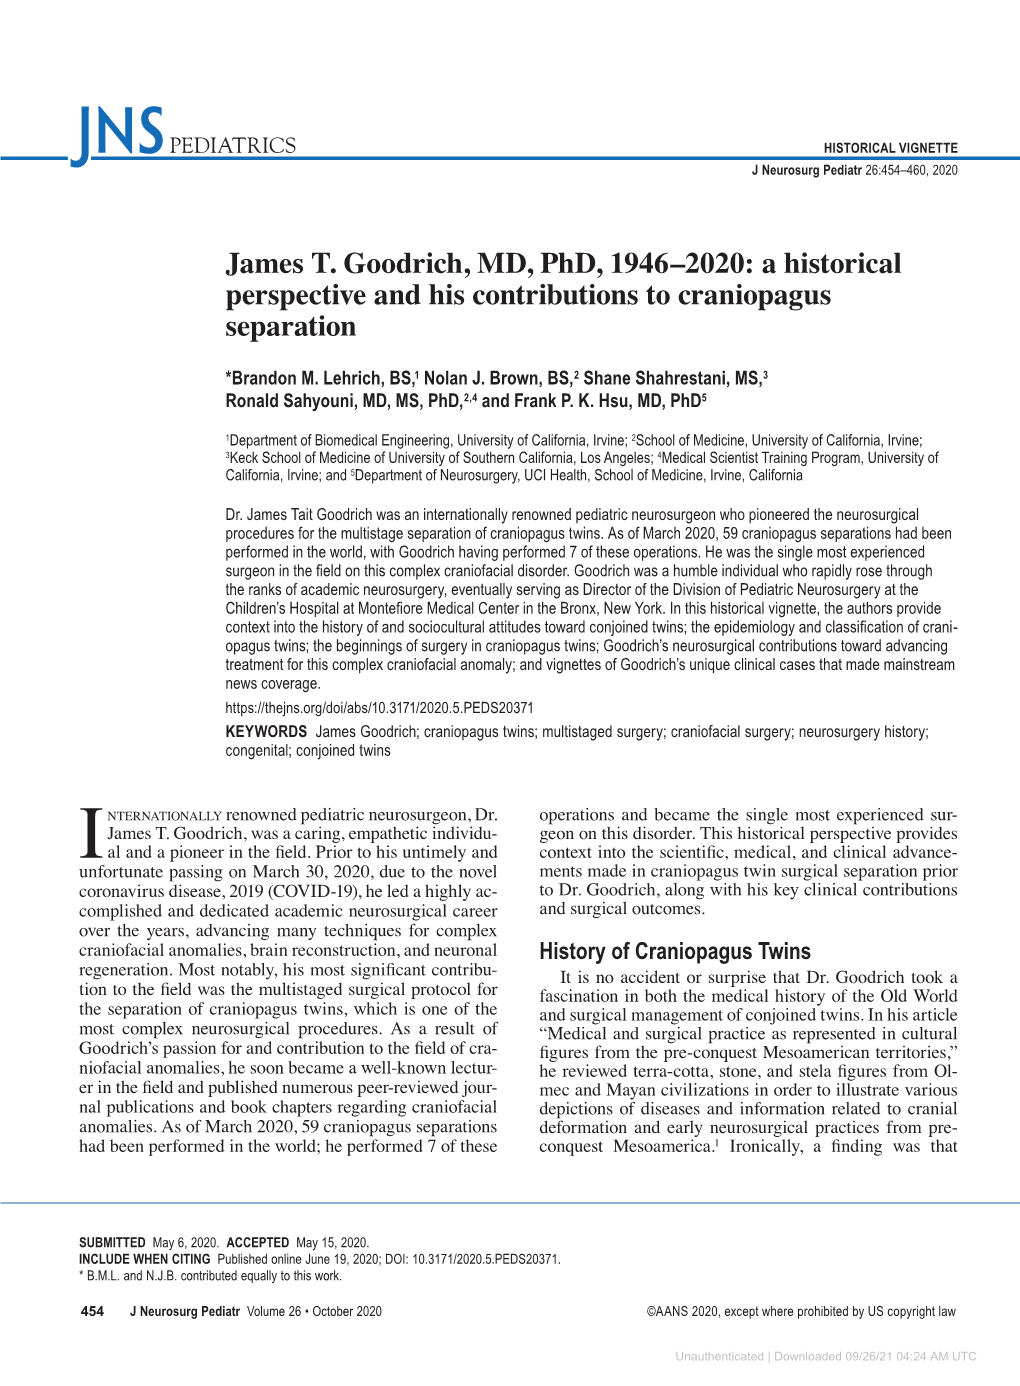 James T. Goodrich, MD, Phd, 1946–2020: a Historical Perspective and His Contributions to Craniopagus Separation